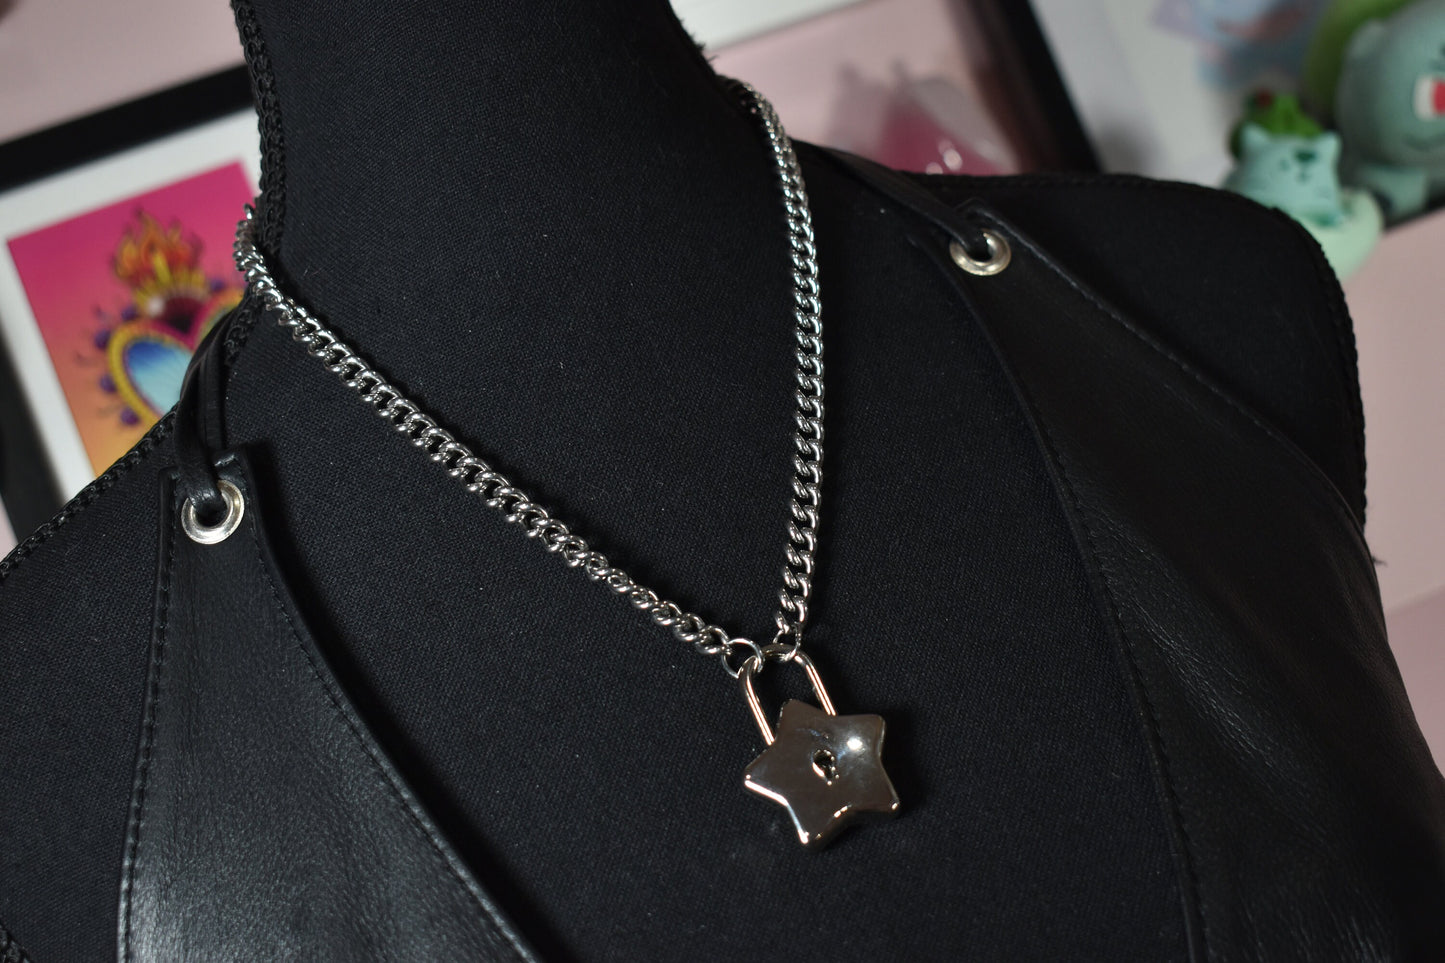 Star Lock Necklace / Stainless Steel Chain (Not The Lock)